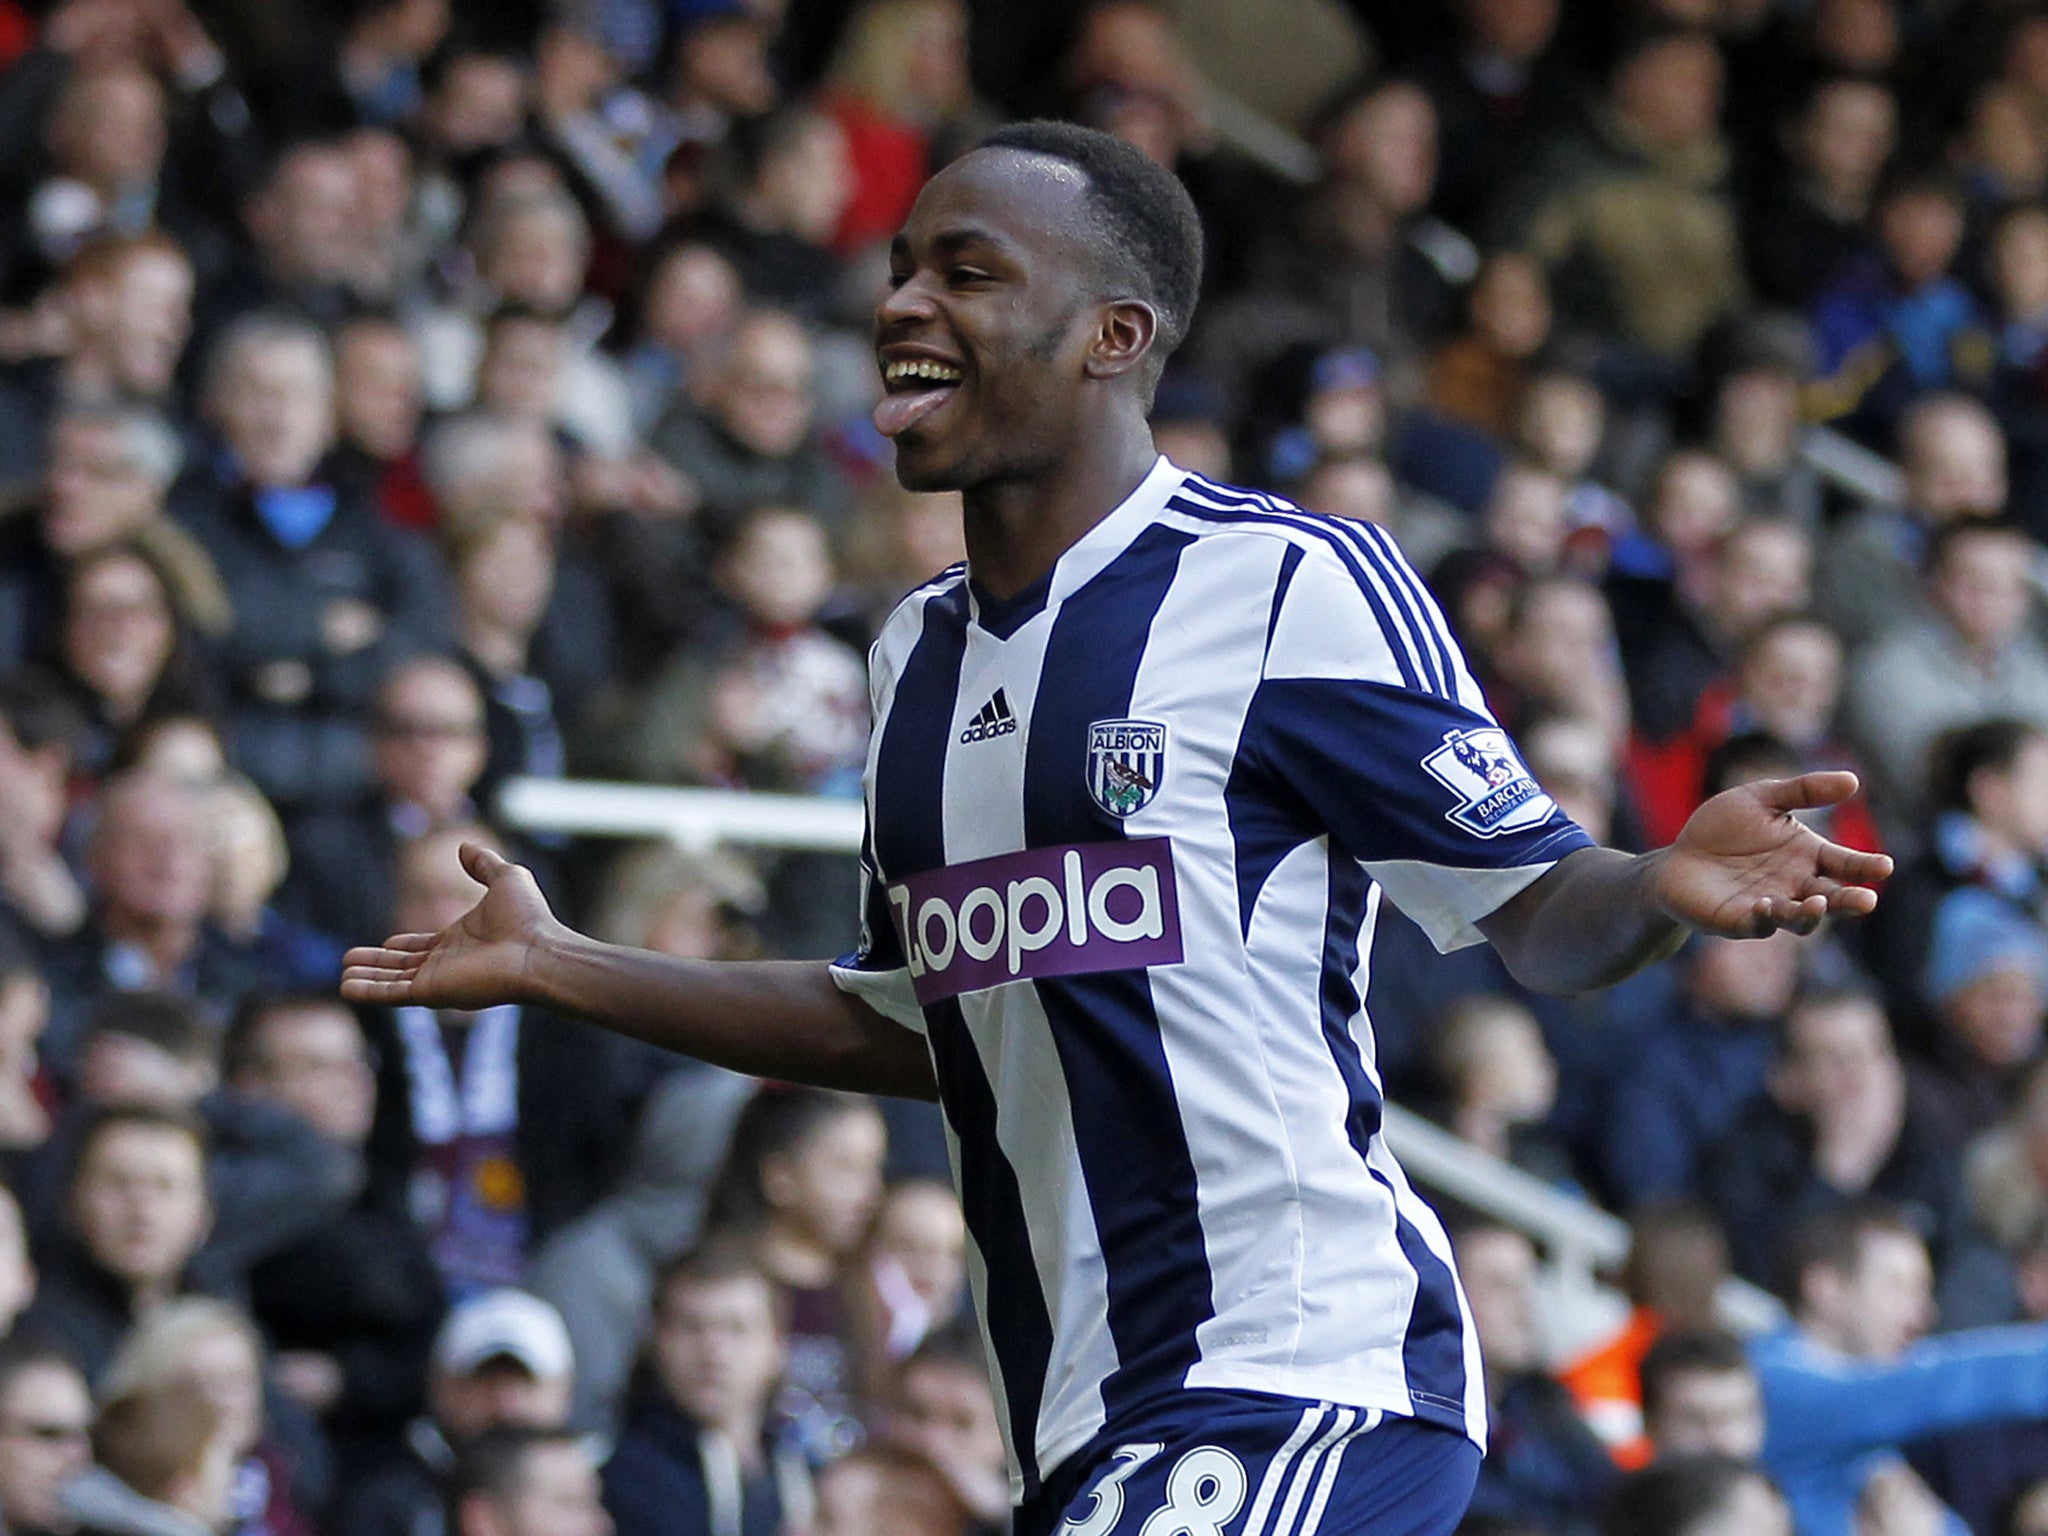 Saido Berahino scored an immediate equaliser for West Brom to drag them back to 3-3 against West Ham